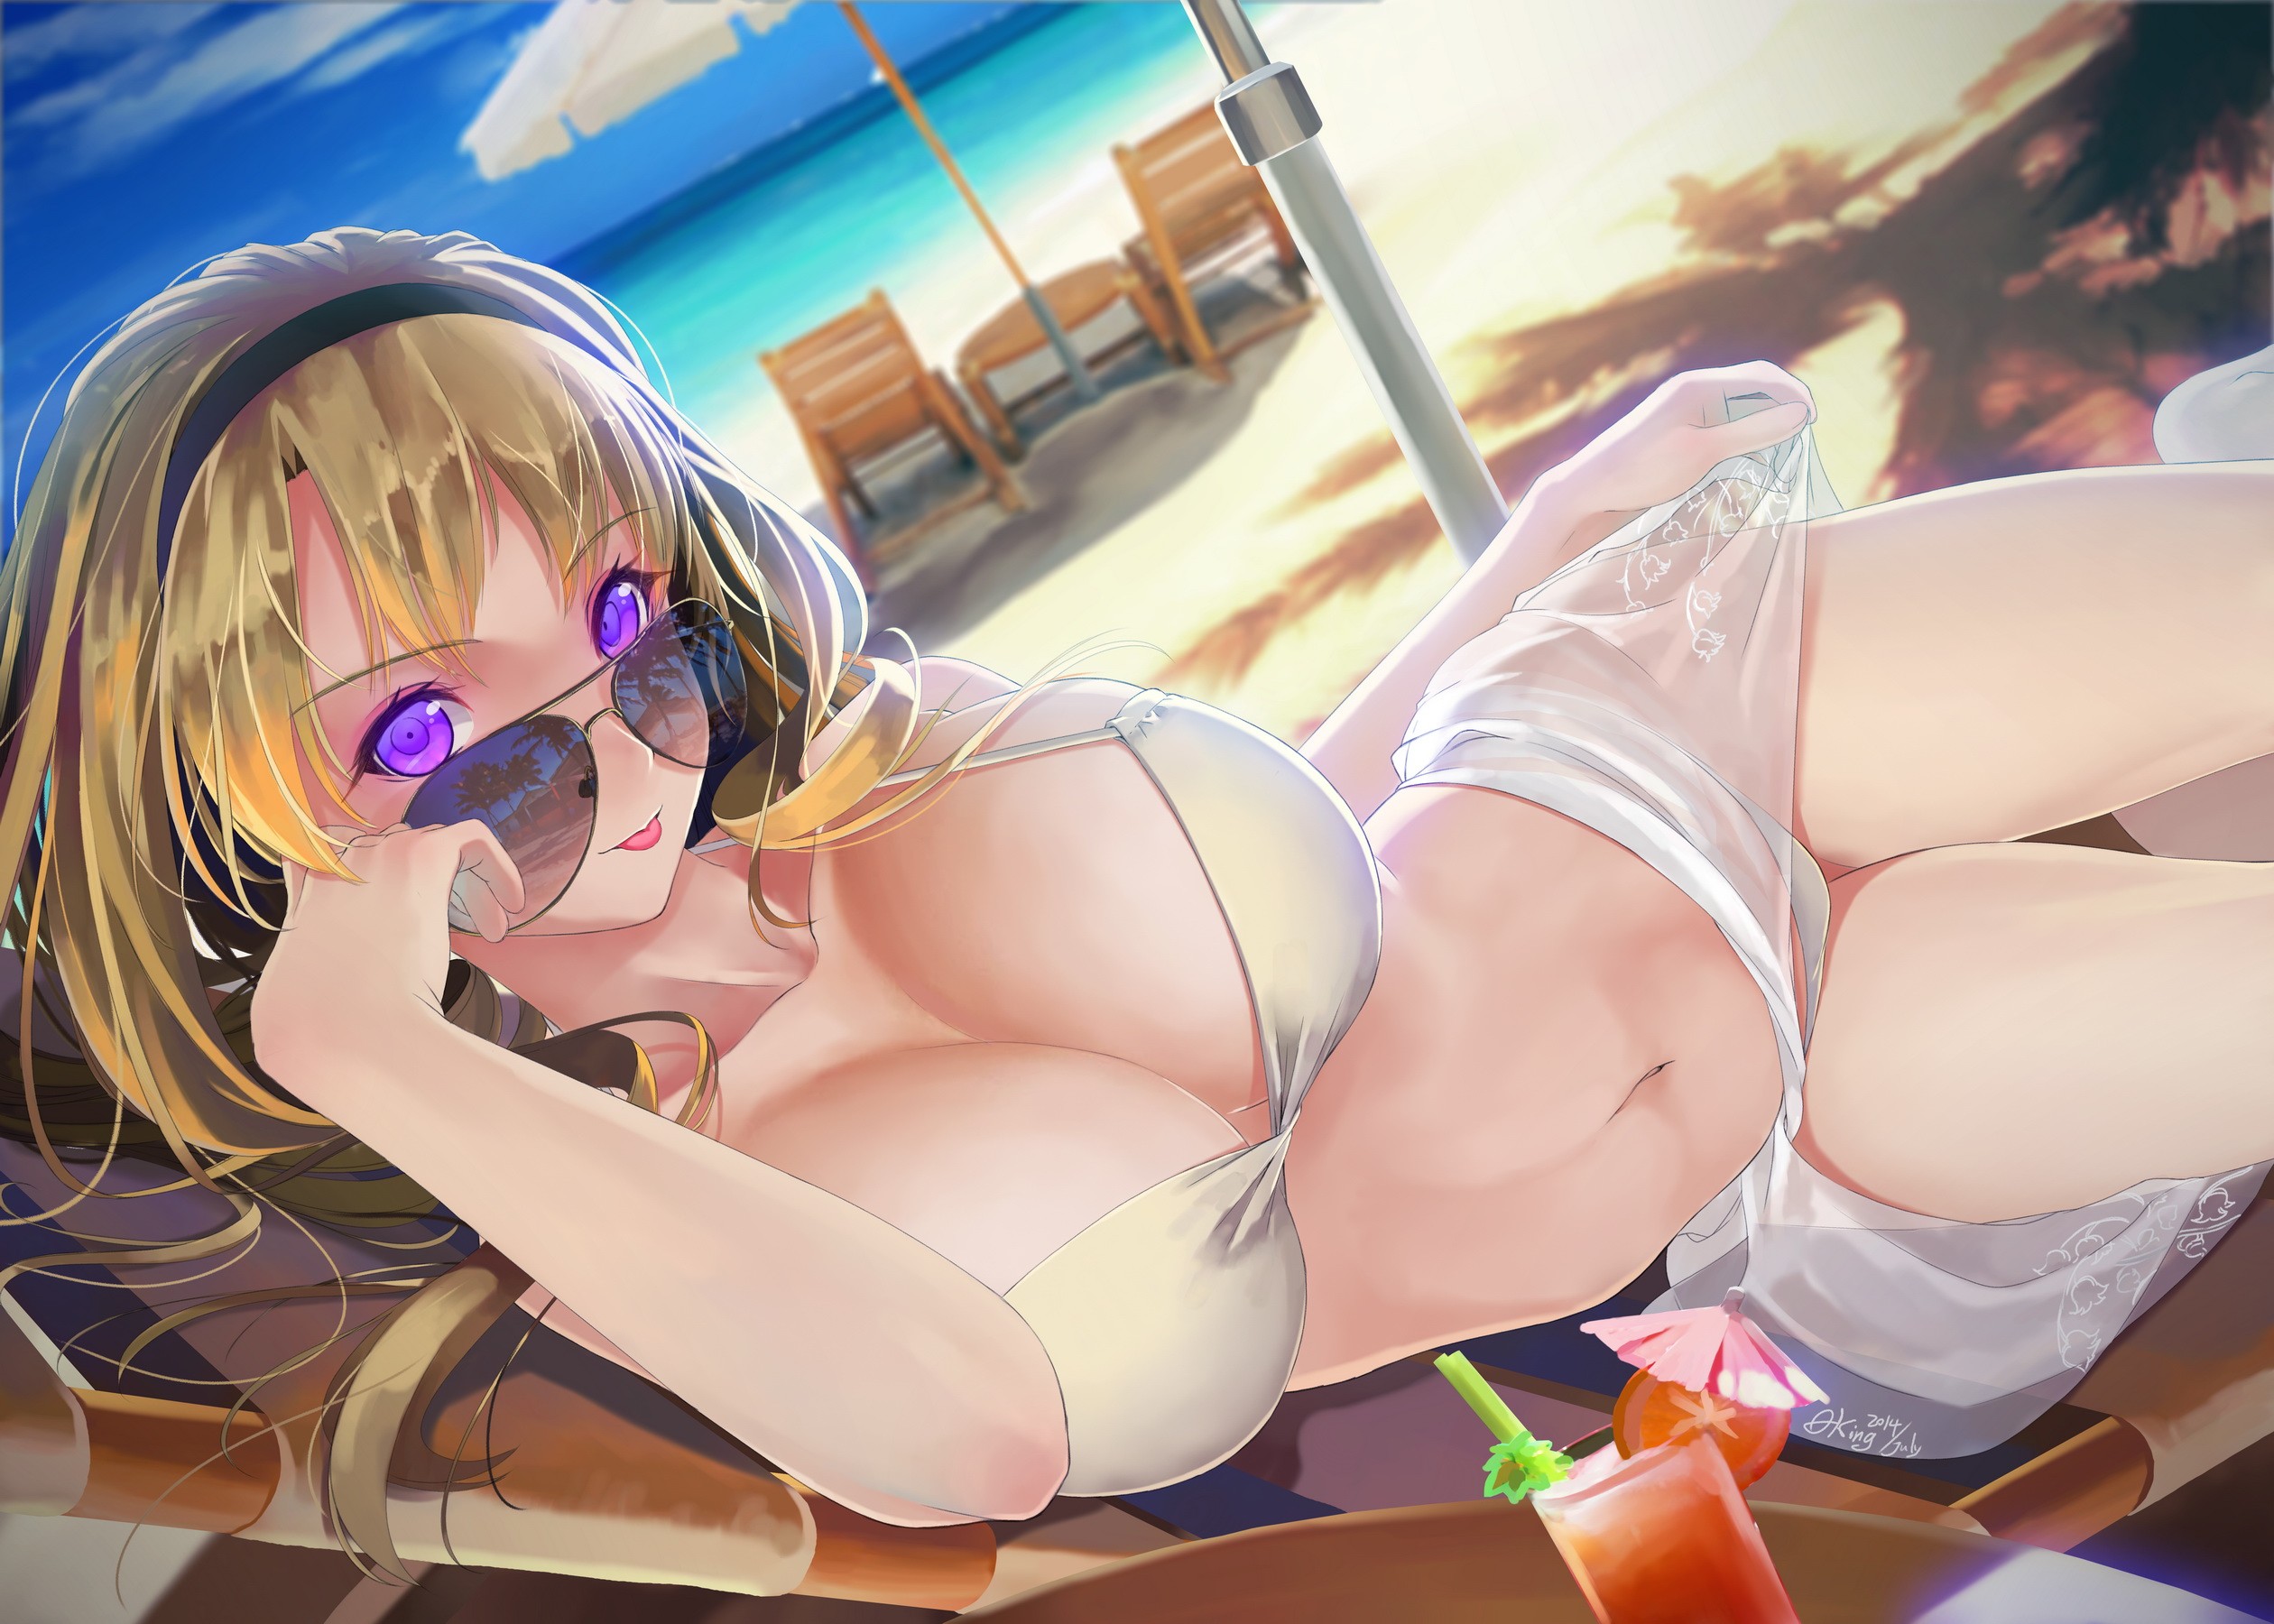 Anime 2520x1800 big boobs original characters beach bikini anime anime girls glasses tongue out cleavage okingjo boobs women women with shades sunglasses belly women outdoors outdoors women on beach blonde tongues huge breasts lying on side purple eyes hair ribbon cocktails